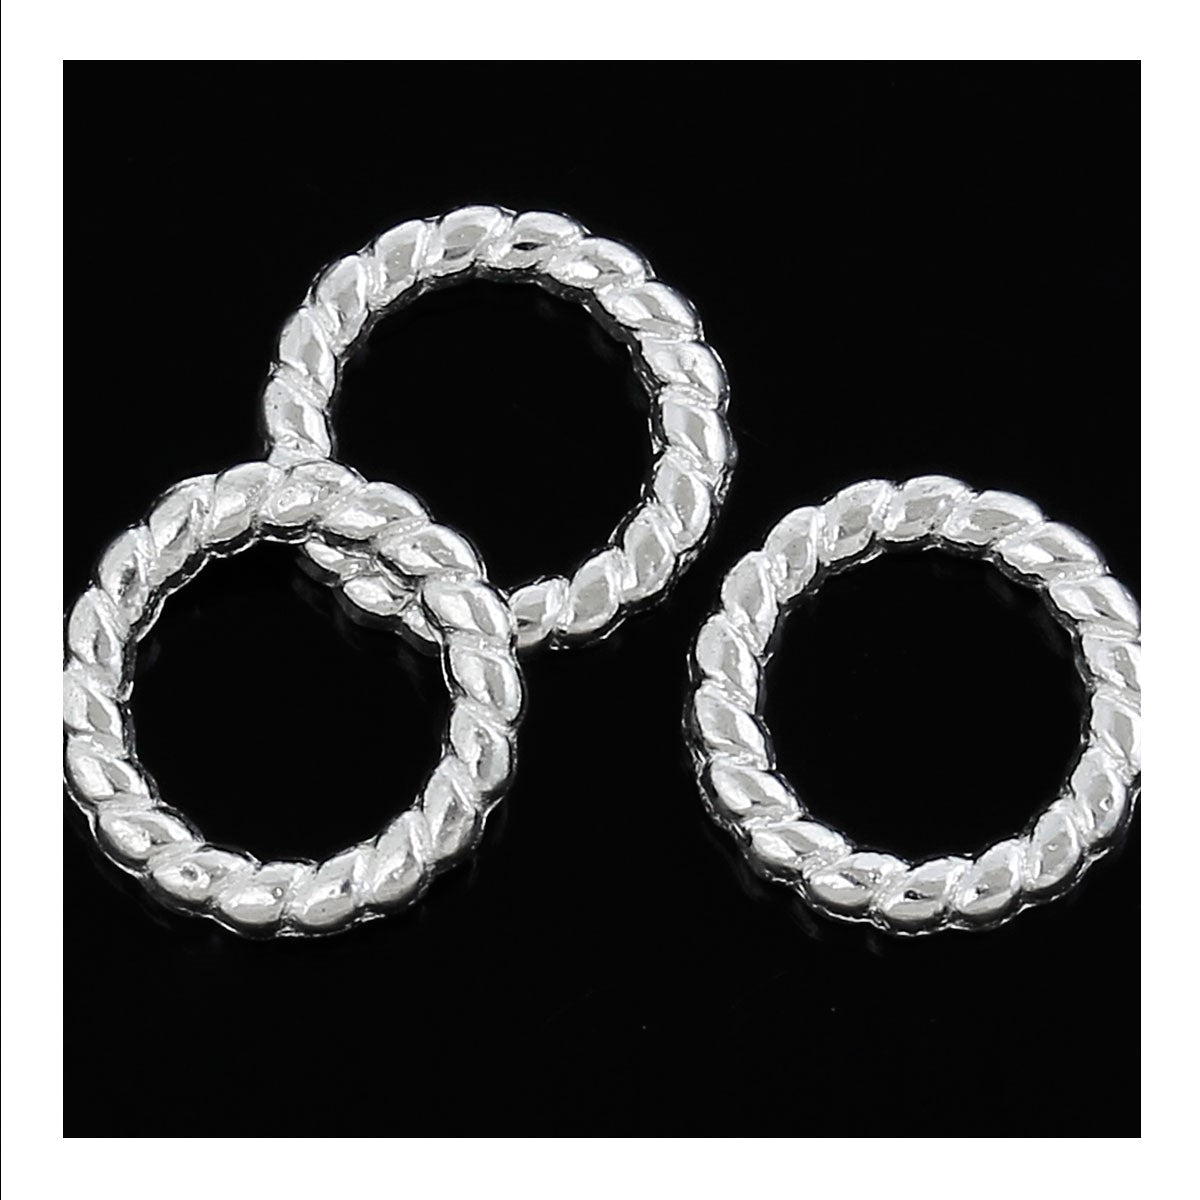 11mm Large Silver Jump Rings, Textured Jump Ring, Jump Rings, 10 Rings,  PW-3002 -  Norway